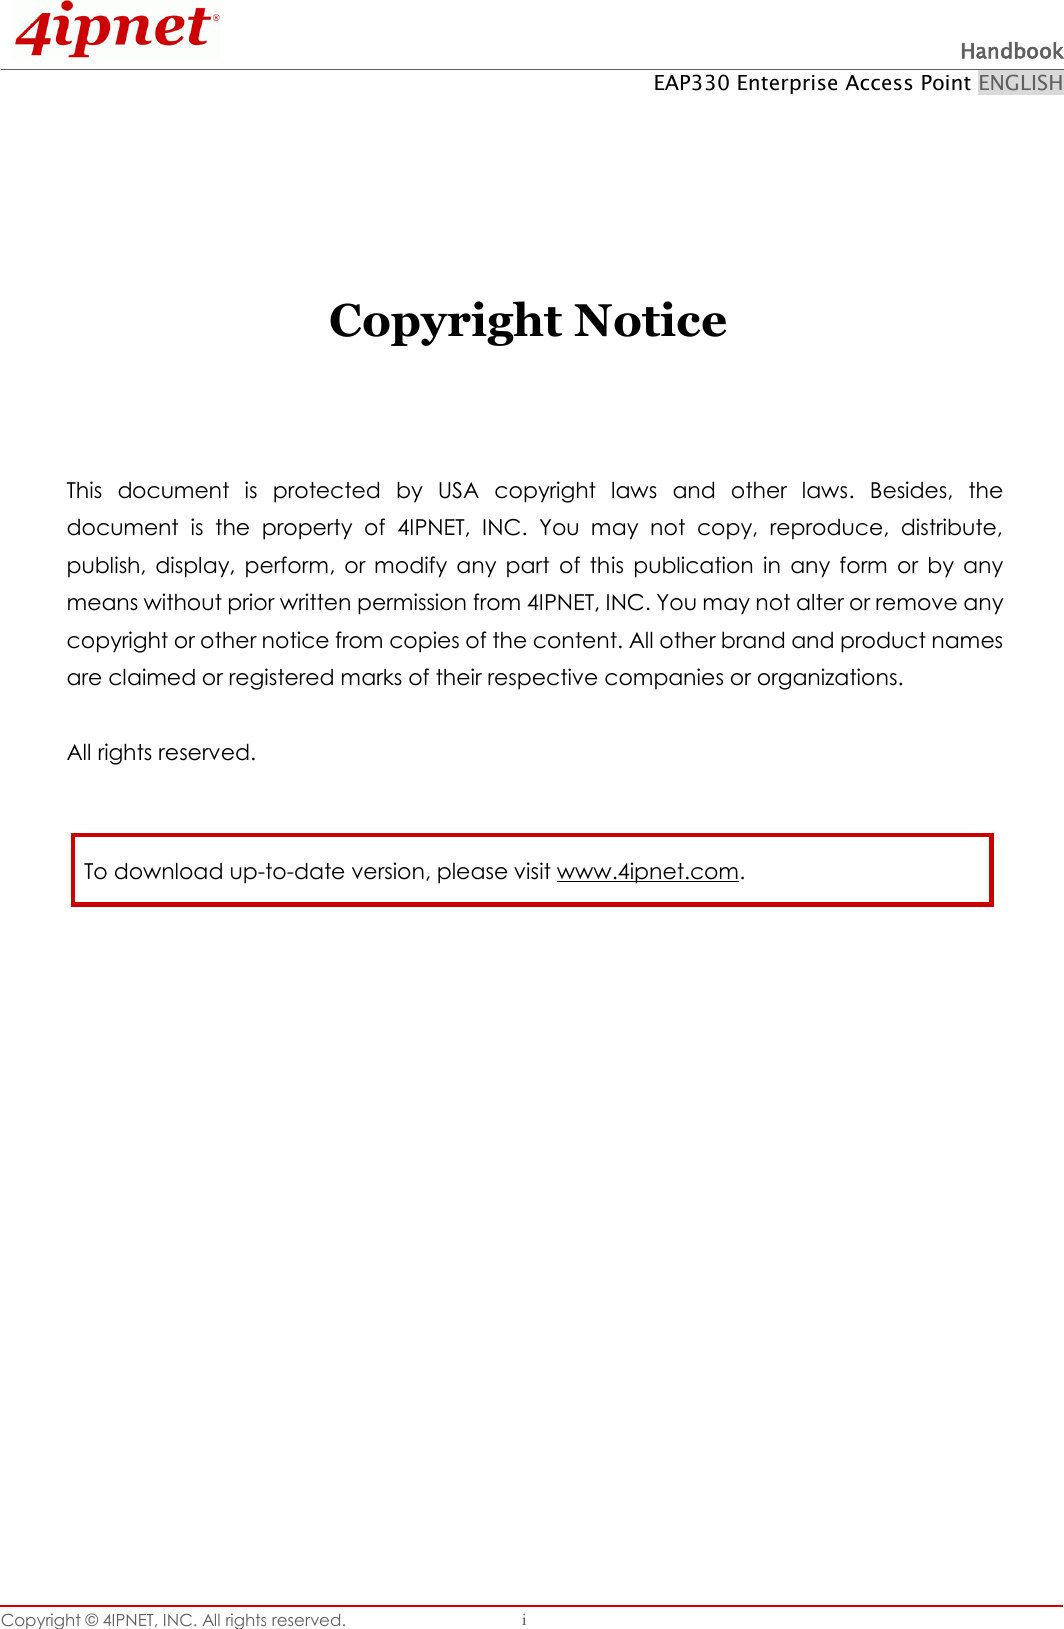  Handbook EAP330 Enterprise Access Point ENGLISH Copyright ©  4IPNET, INC. All rights reserved.   i     Copyright Notice    This  document  is  protected  by  USA  copyright  laws  and  other  laws.  Besides,  the document  is  the  property  of  4IPNET,  INC.  You  may  not  copy,  reproduce,  distribute, publish,  display,  perform,  or  modify  any  part  of  this  publication  in  any  form  or  by  any means without prior written permission from 4IPNET, INC. You may not alter or remove any copyright or other notice from copies of the content. All other brand and product names are claimed or registered marks of their respective companies or organizations.  All rights reserved.     To download up-to-date version, please visit www.4ipnet.com. 